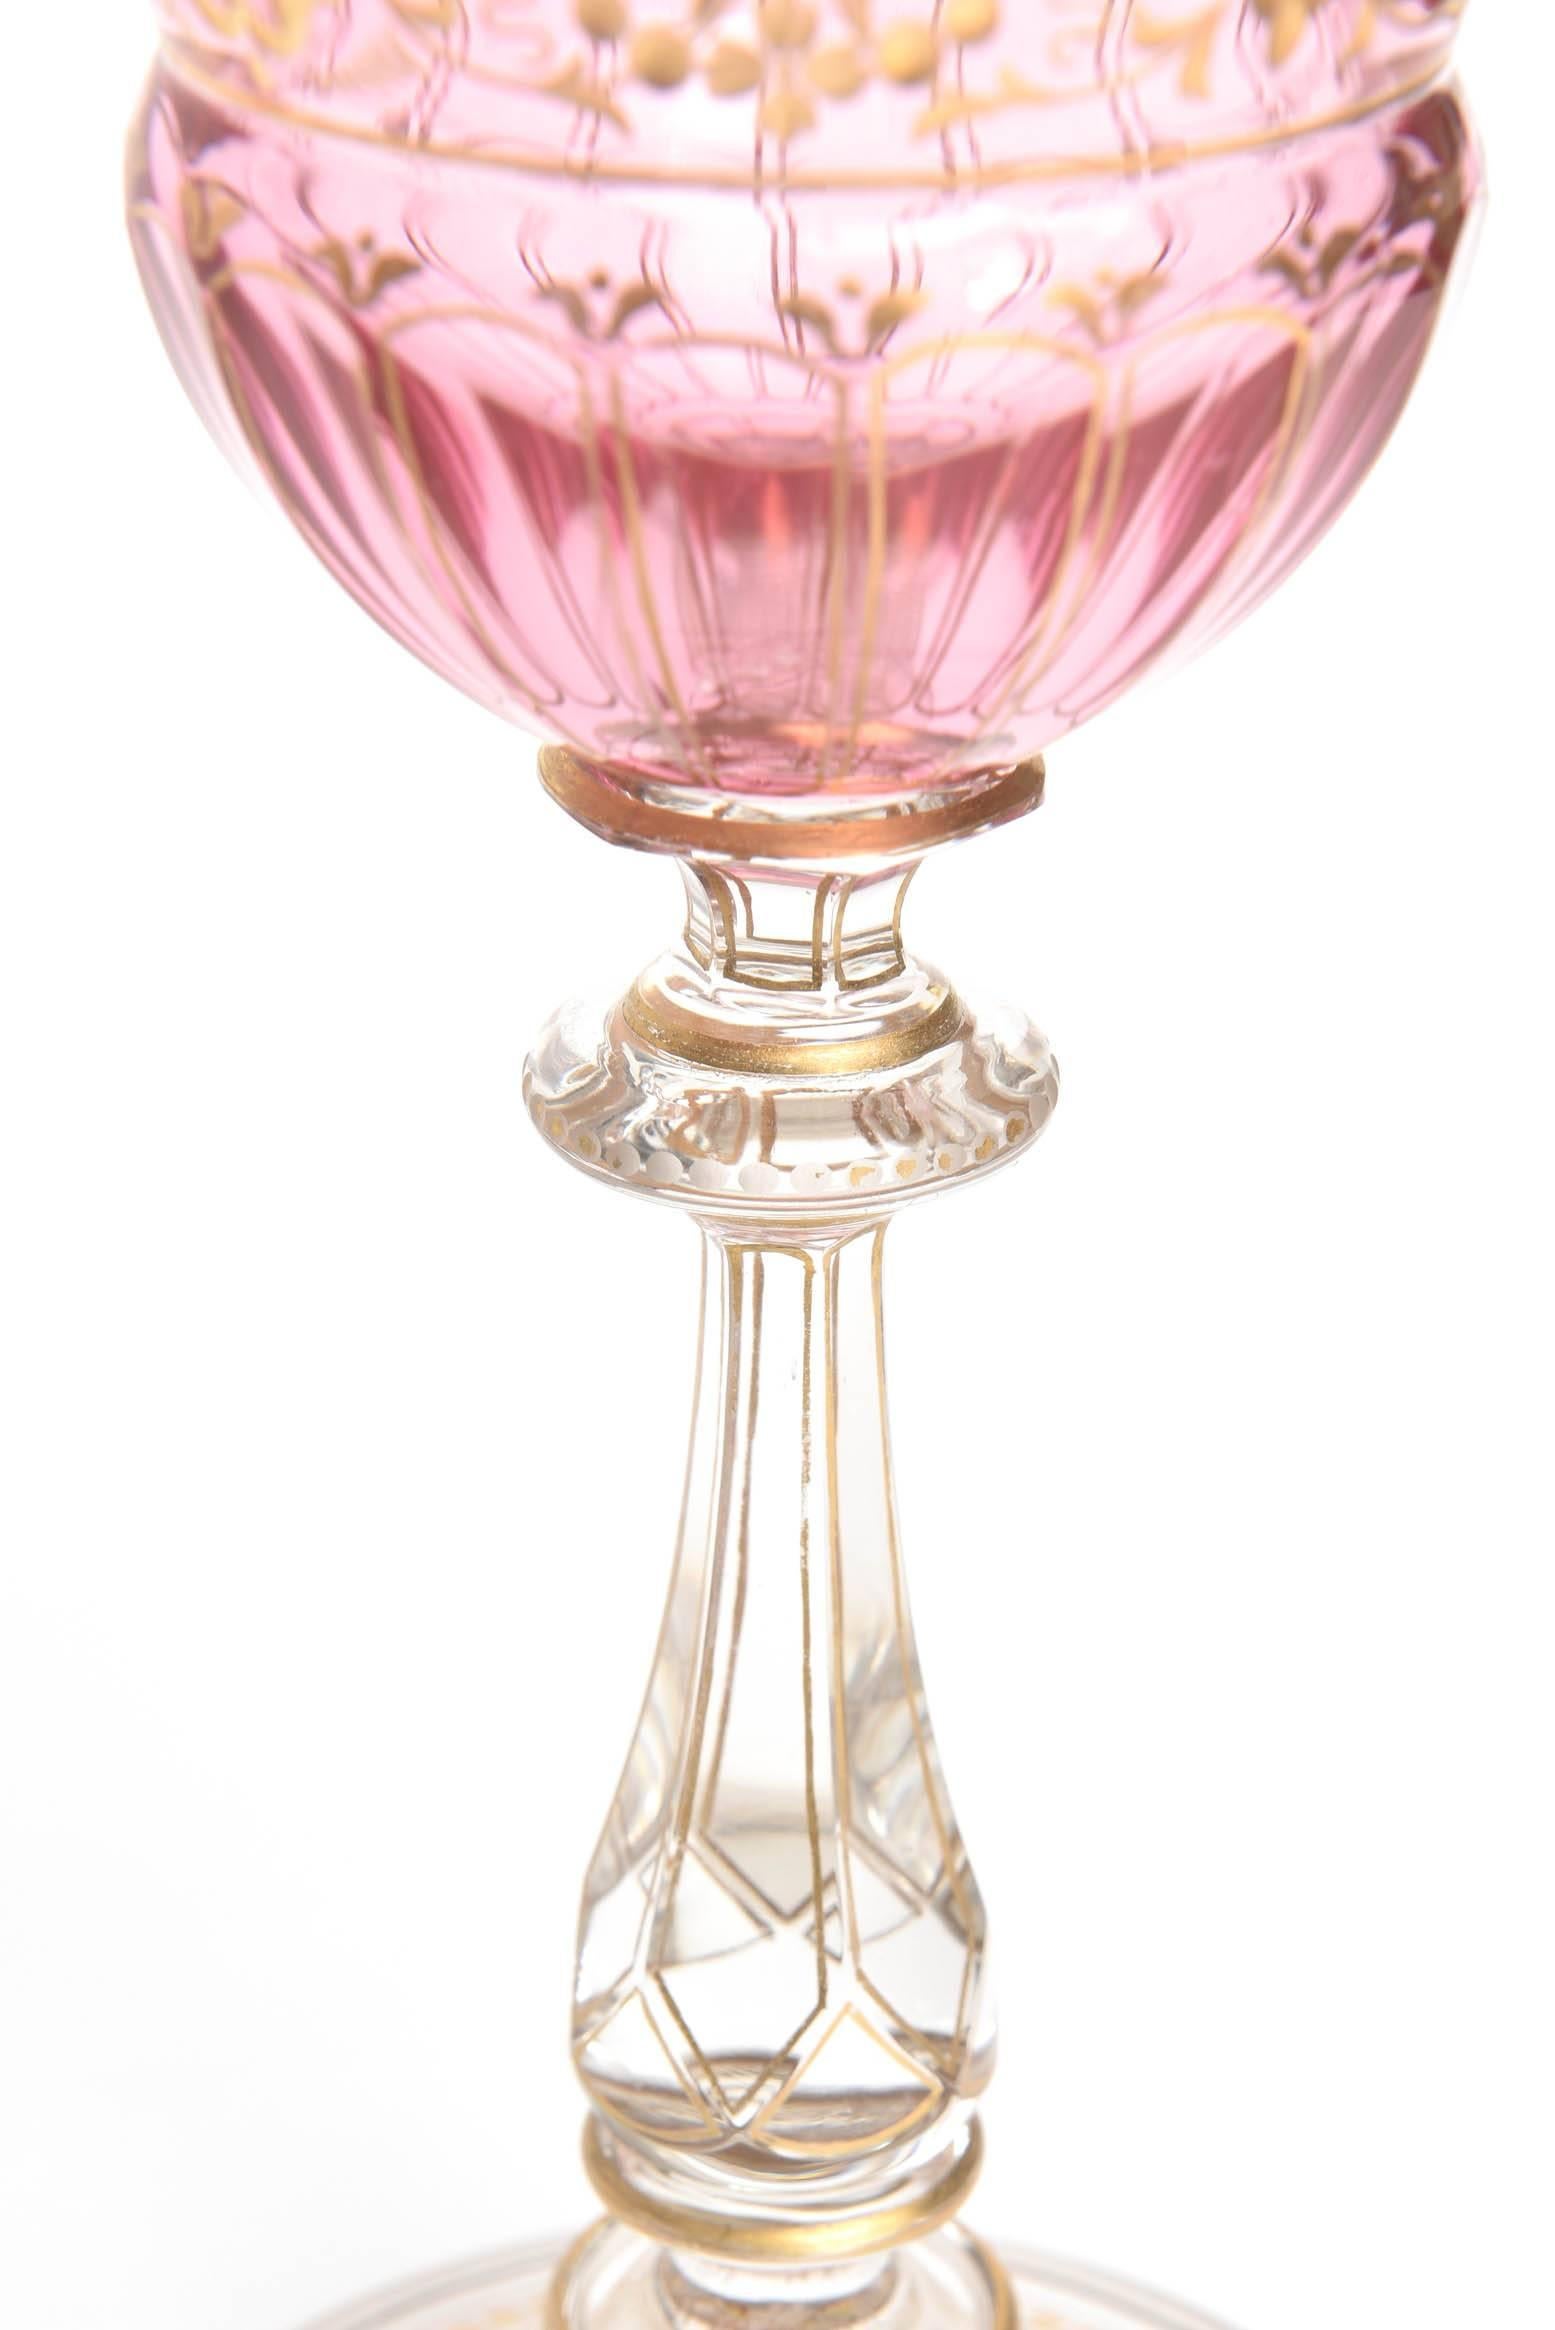 8 Elaborate Gilt and Ruby Pink Wine Goblets with Beautiful Stem 2